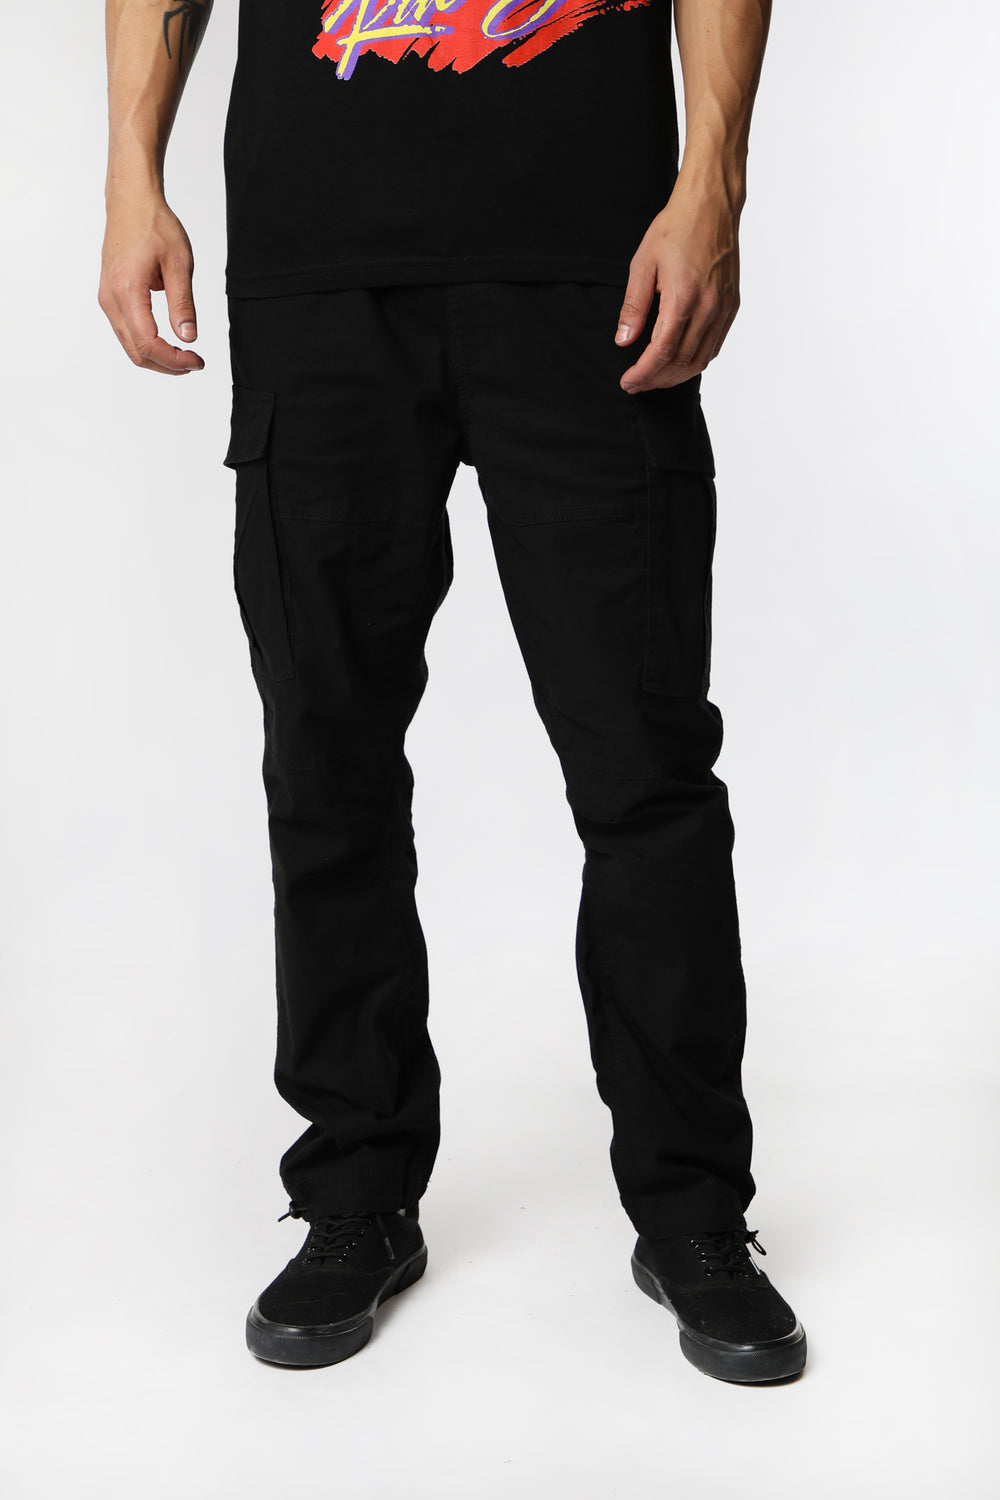 West49 Mens Ripstop Bungee Cargo Jogger West49 Mens Ripstop Bungee Cargo Jogger